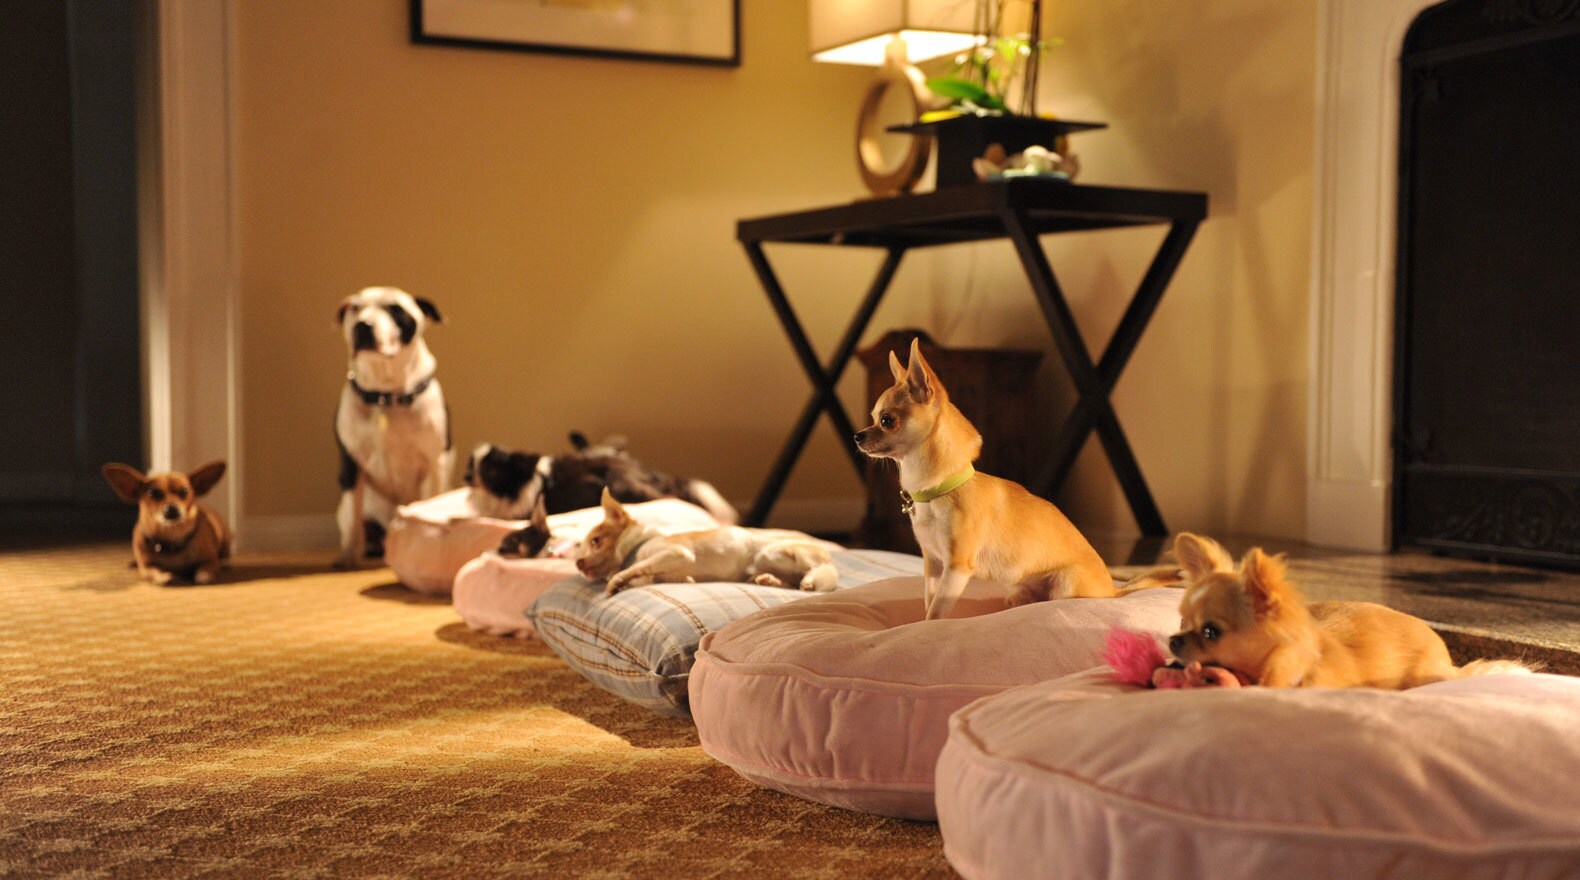 Seven dogs, some sitting on pillows, in a hotel room